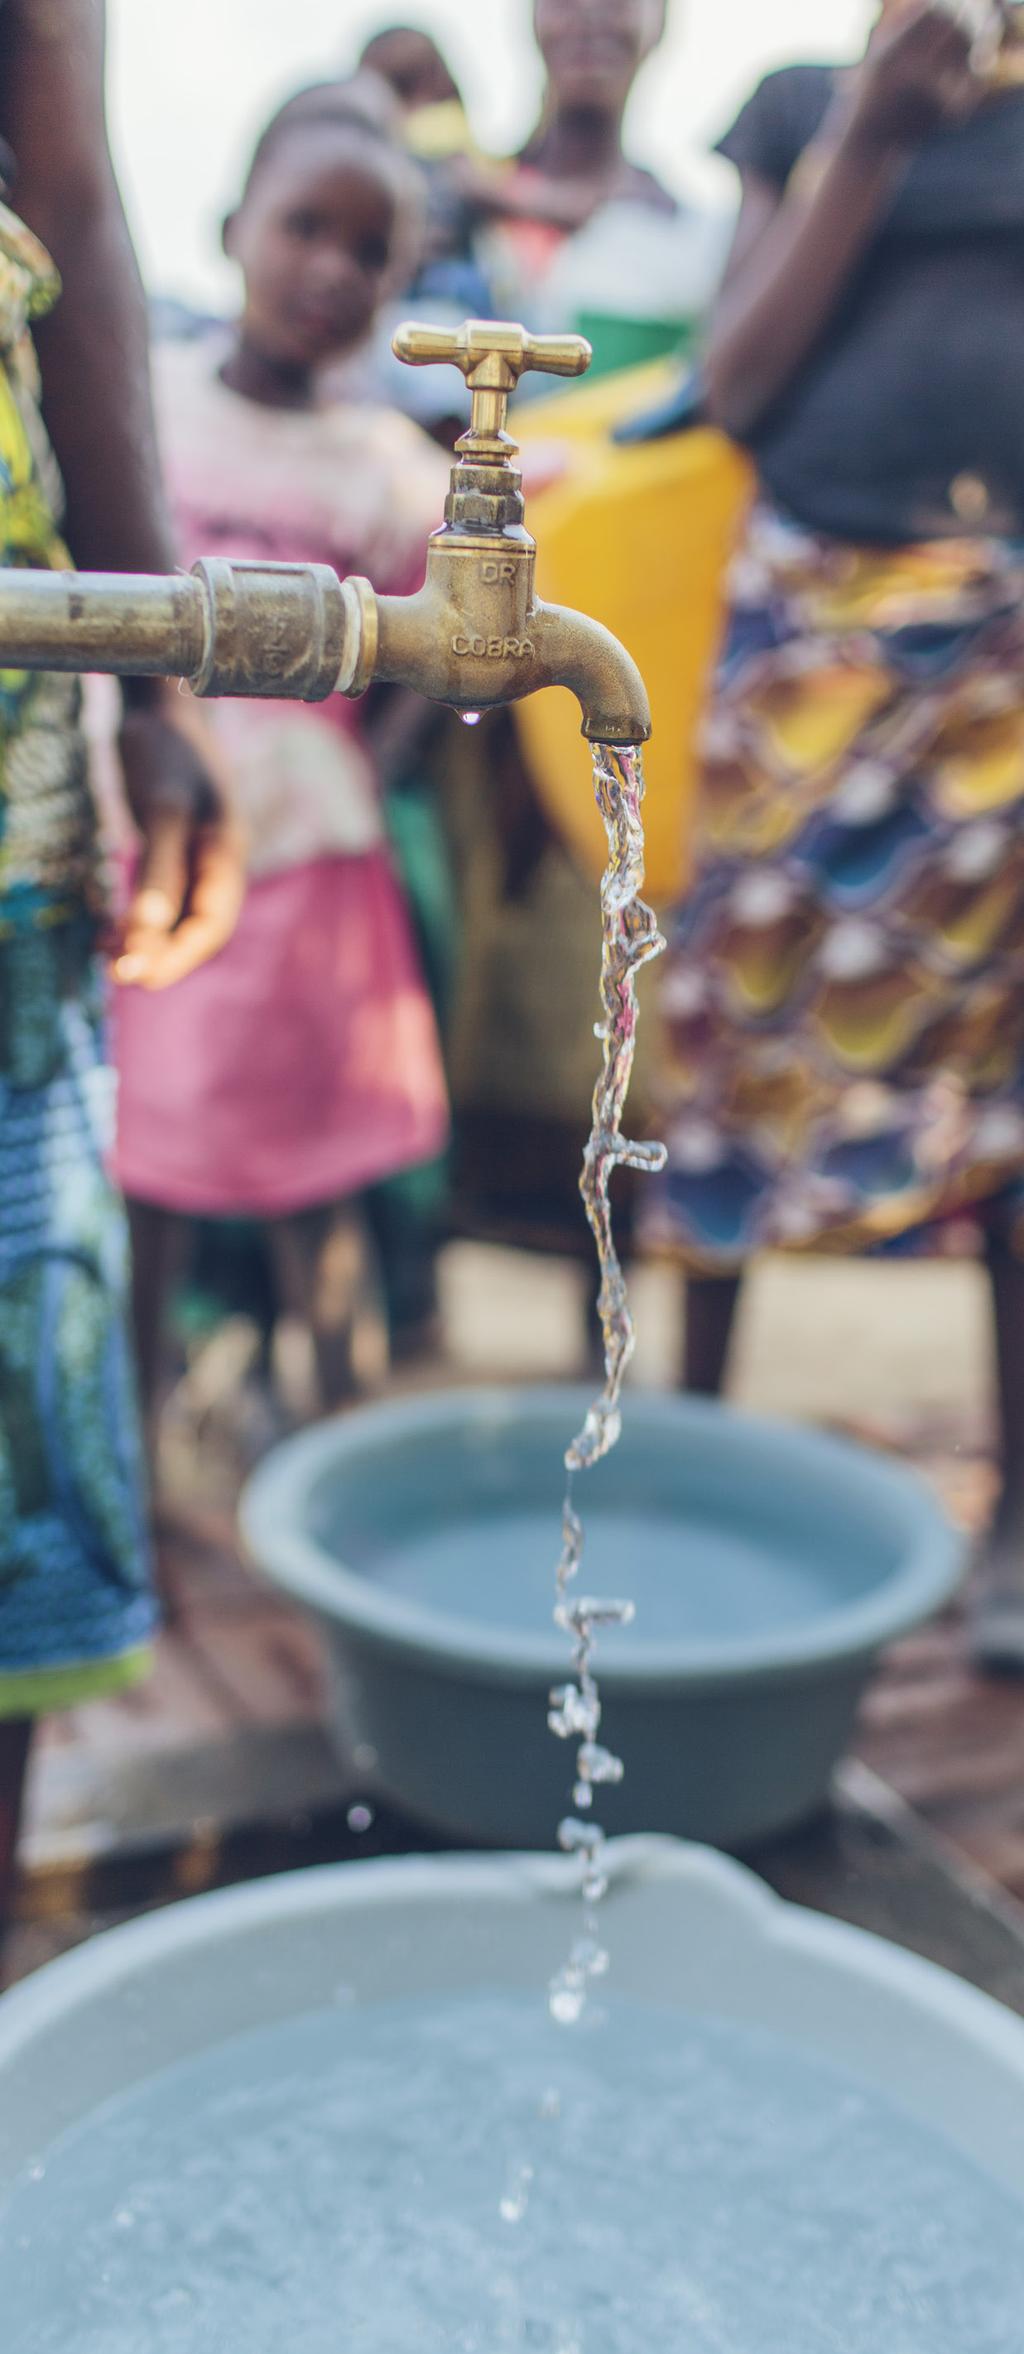 The Global Water Crisis Roughly 1.8 billion people wake up every day to a life without safe drinking water. Children are sick and weak.